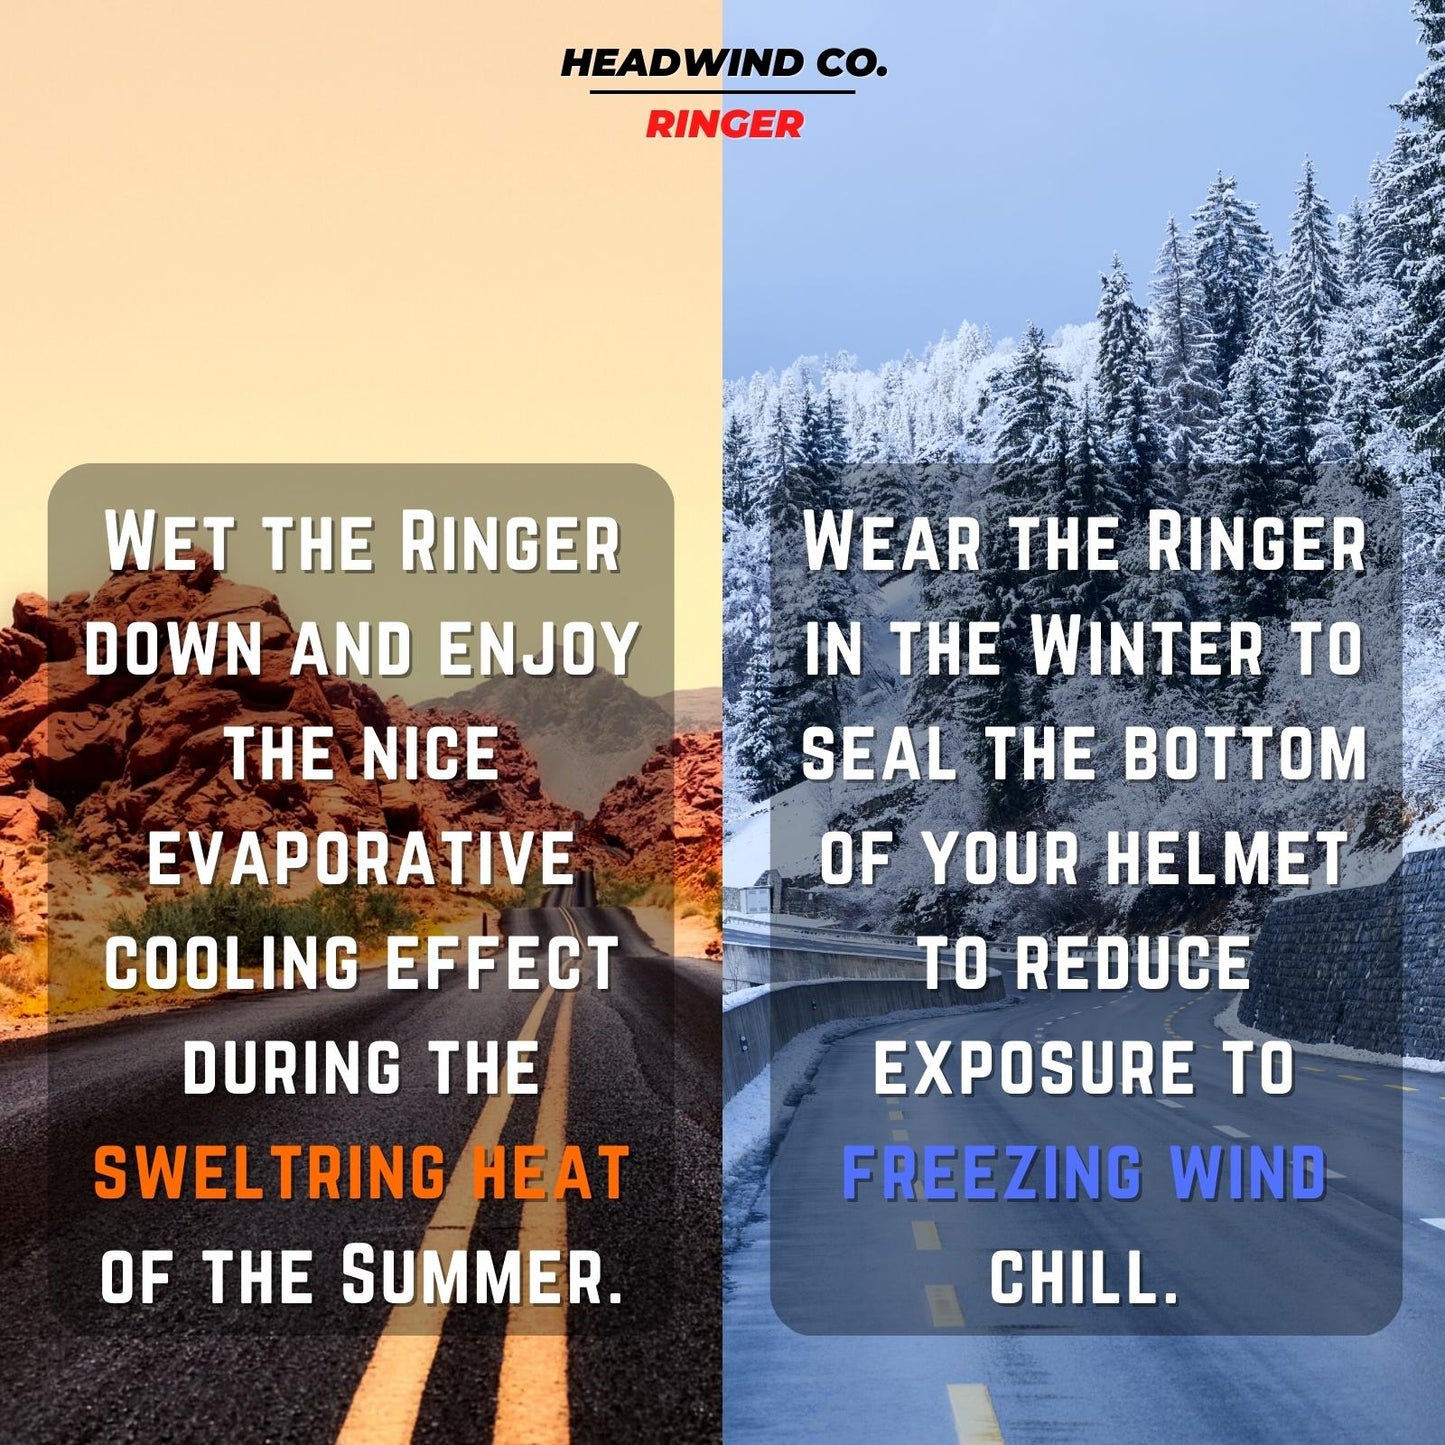 The Headwind Ringer can be used in the summer with an evaporative cooling effect or in the winter to reduce exposure to freezing wind chill.